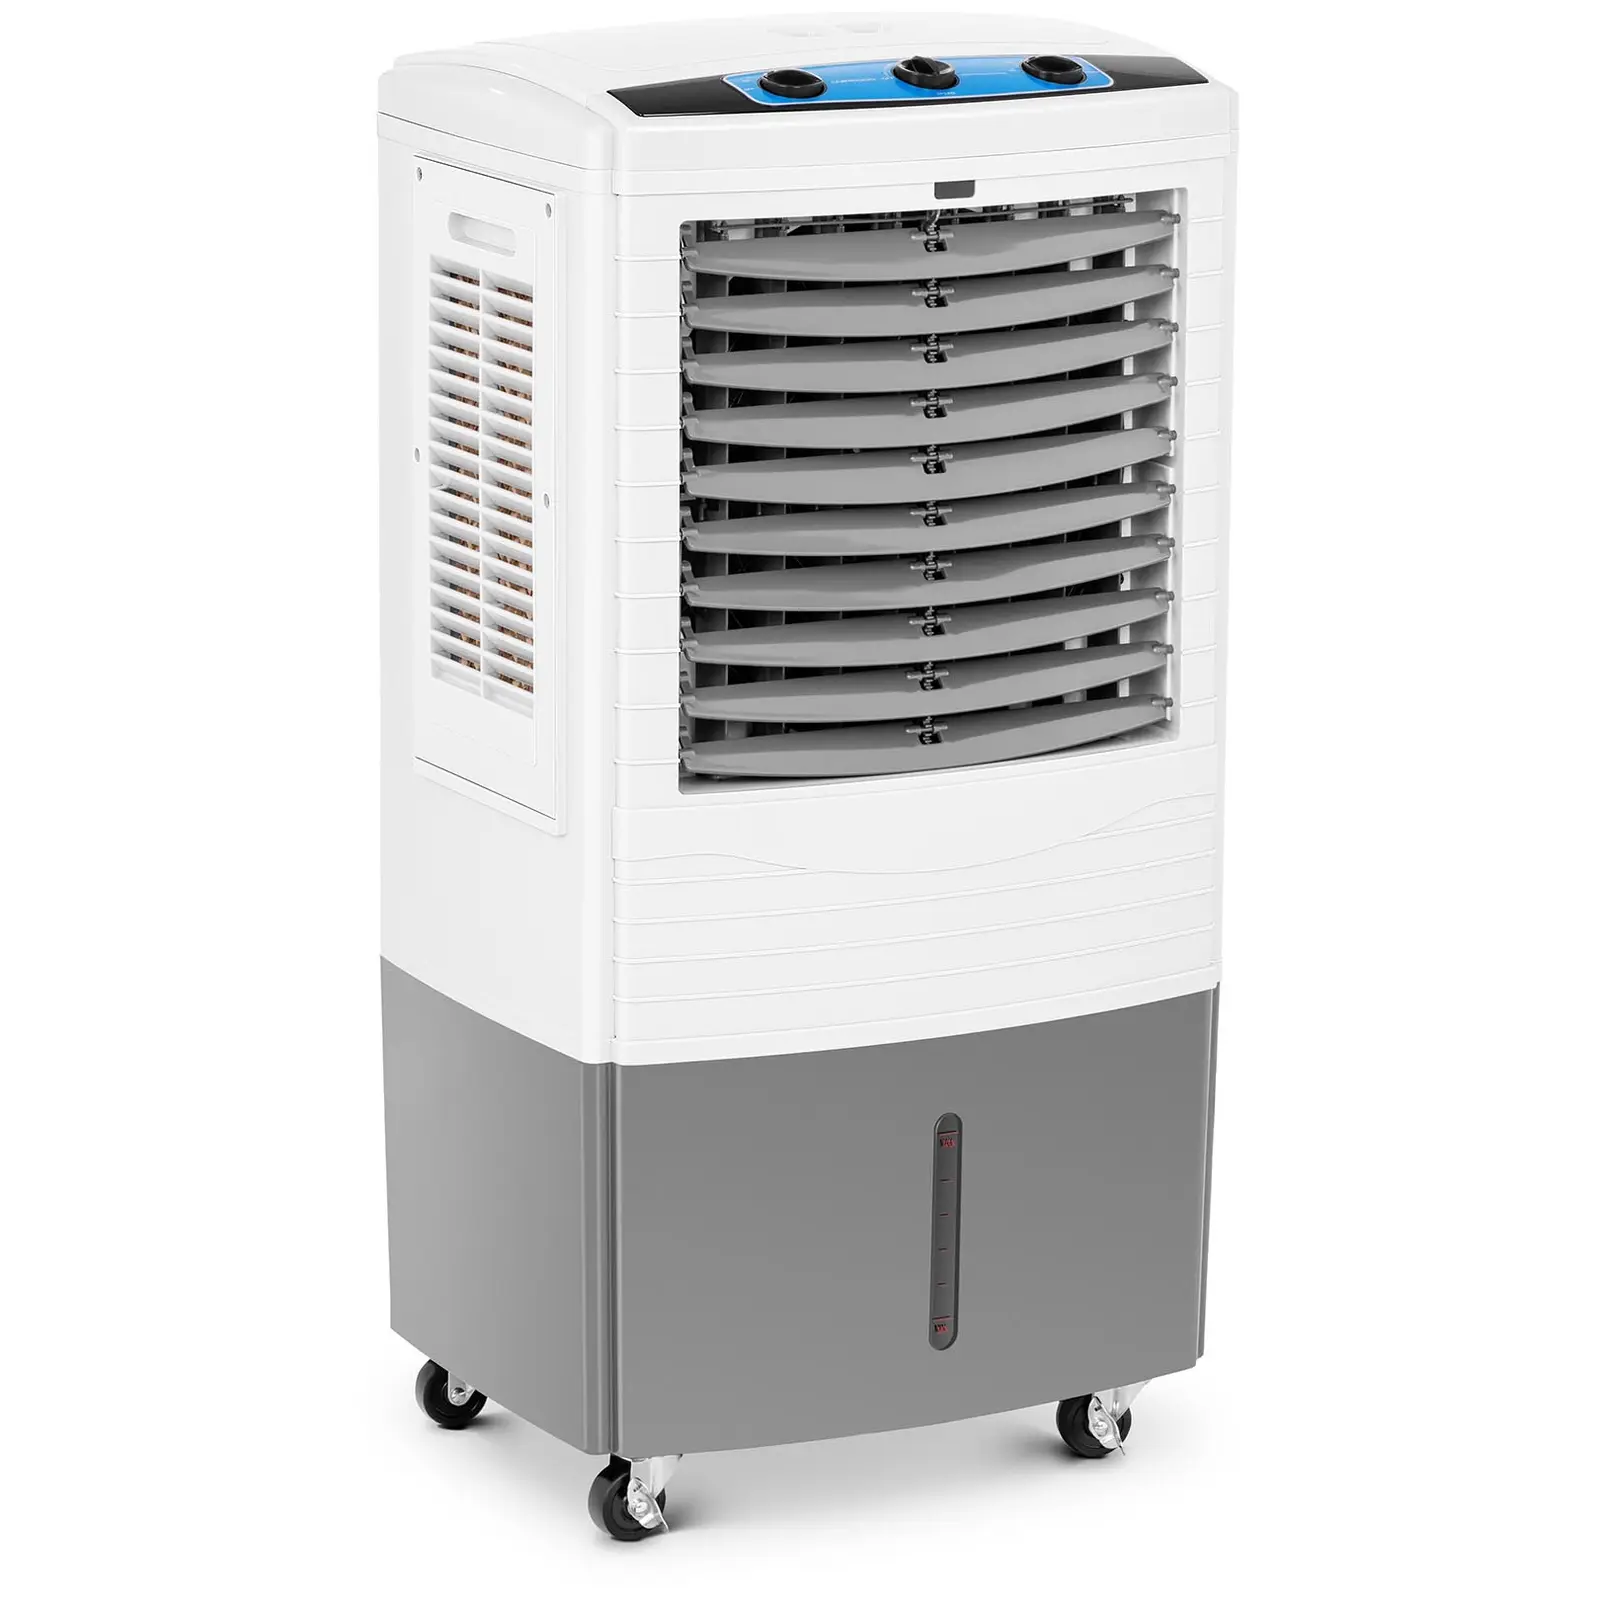 Factory second Air Cooler - 40 L water tank - 3-in-1